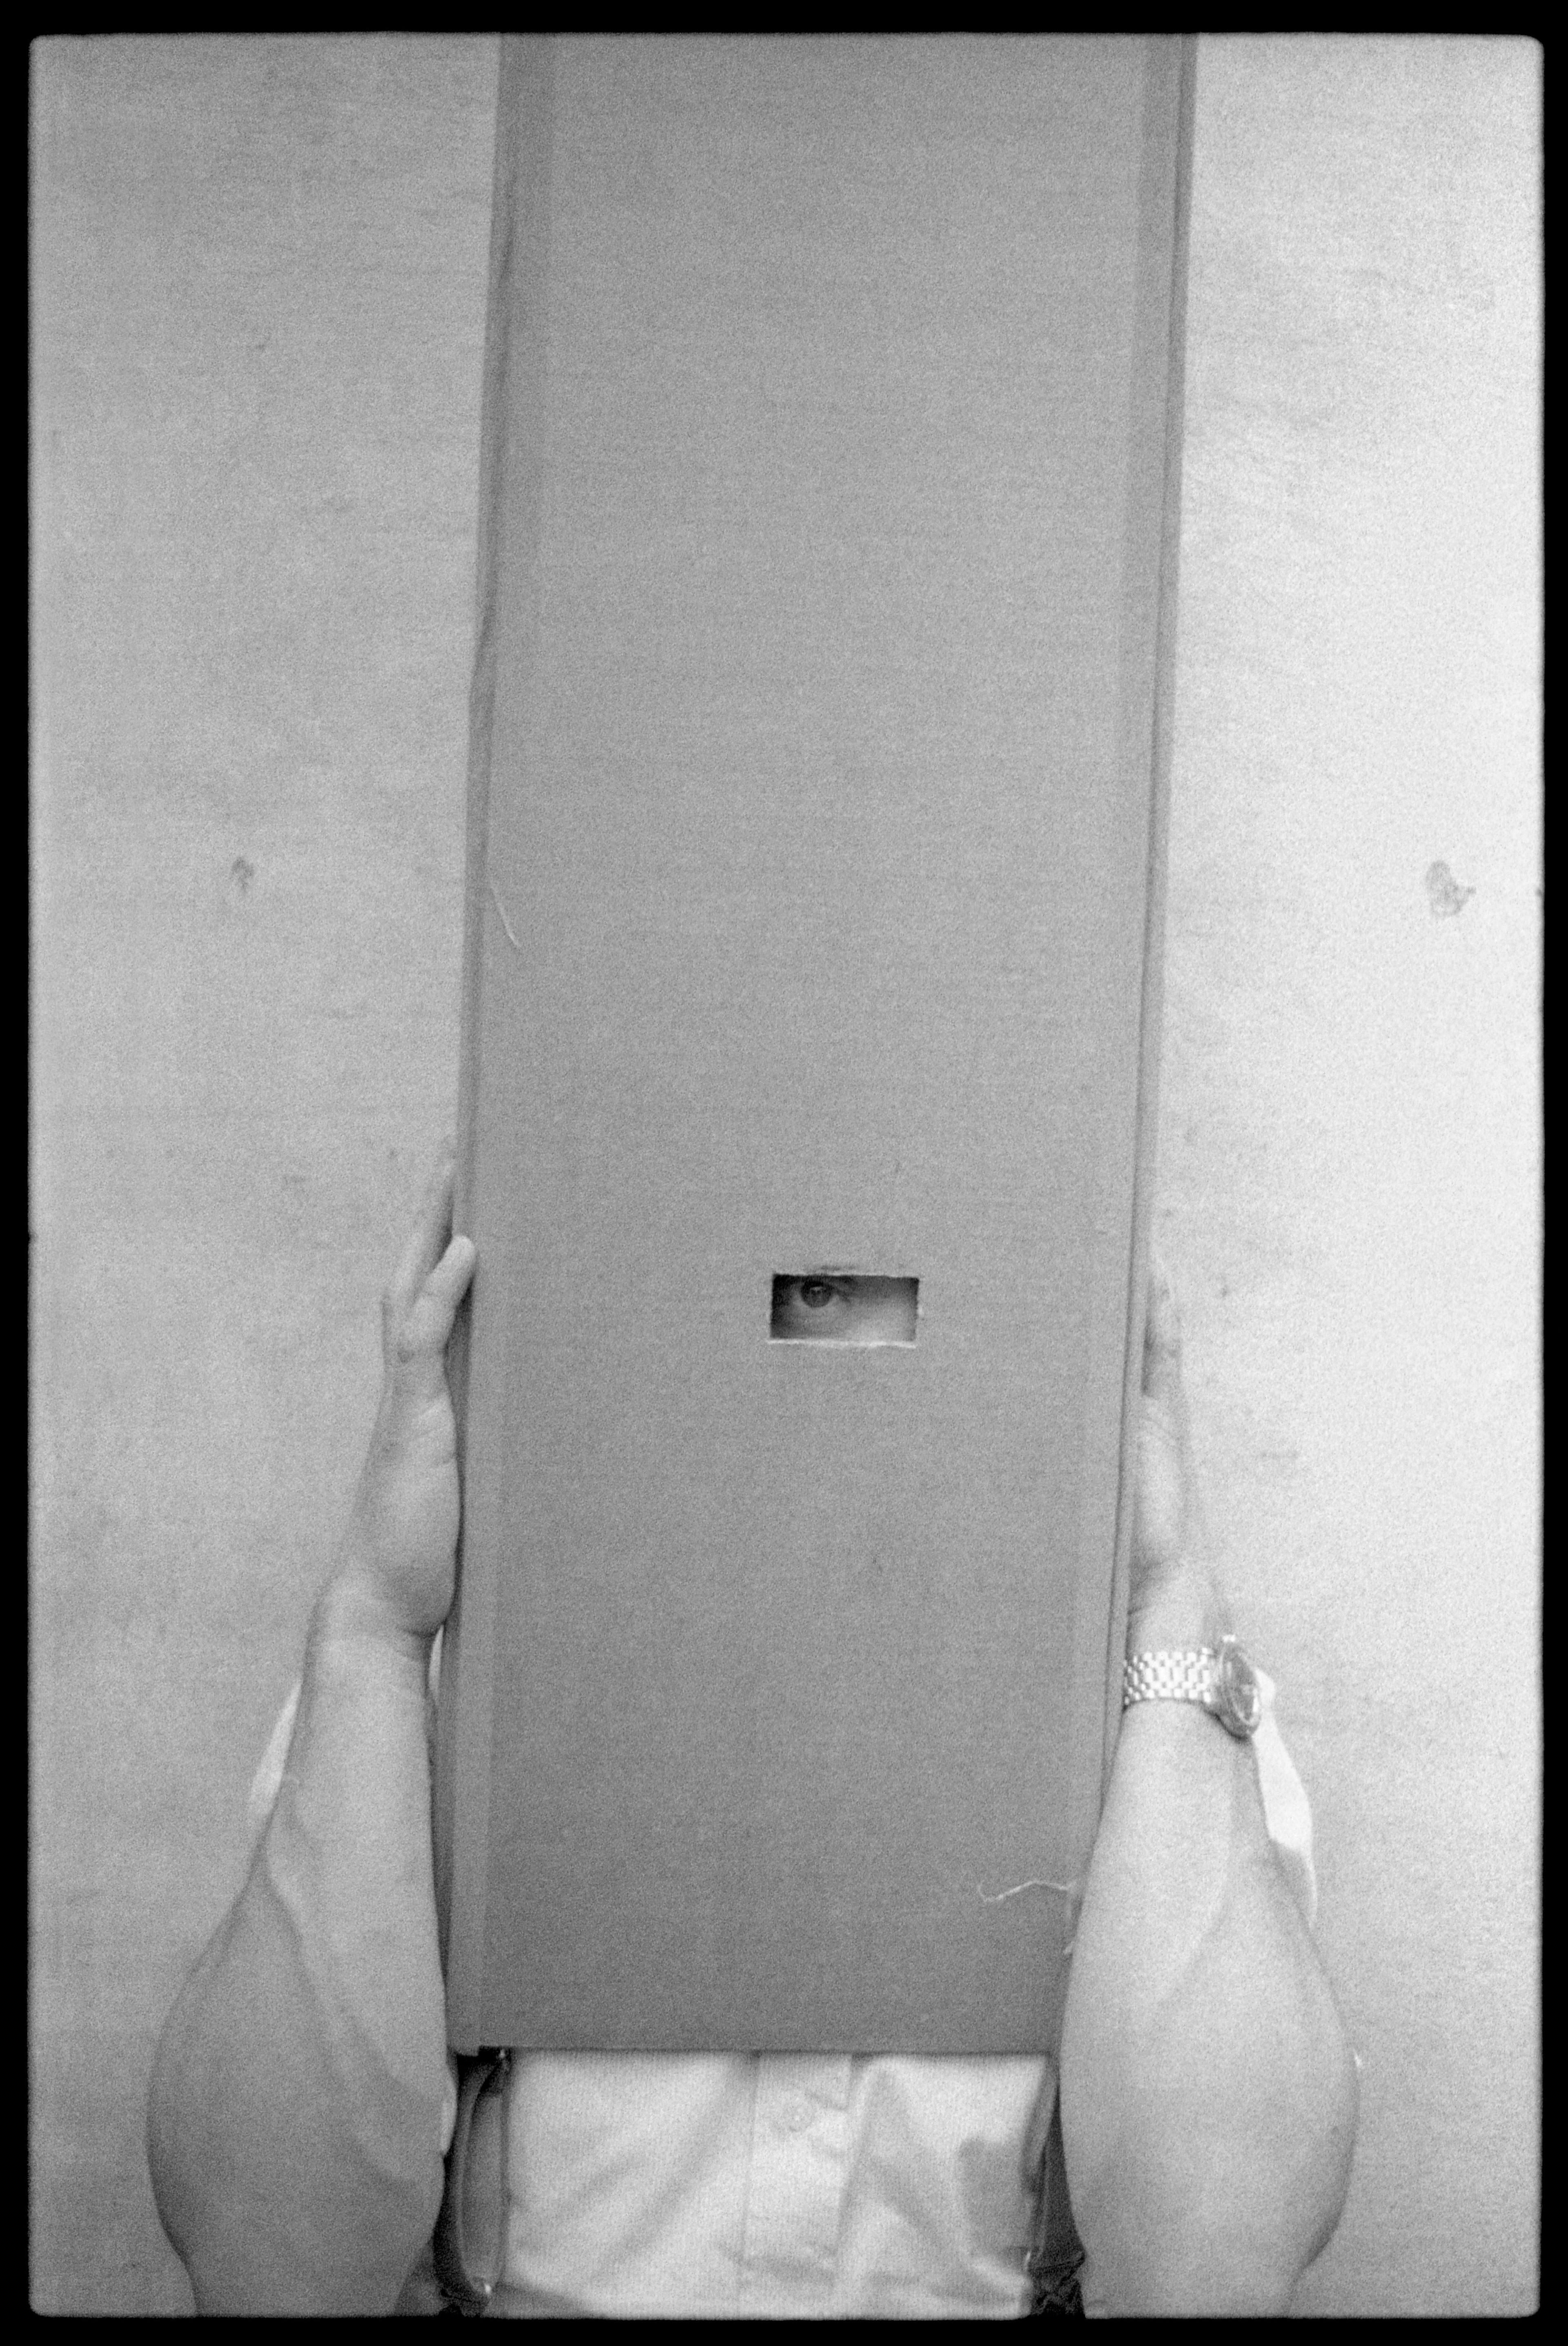  Cardboard mask made at 'Body and Constraints' workshop at Davide Mosconi's home in Milan, June 1975. Photo: Archive Davide Mosconi. 